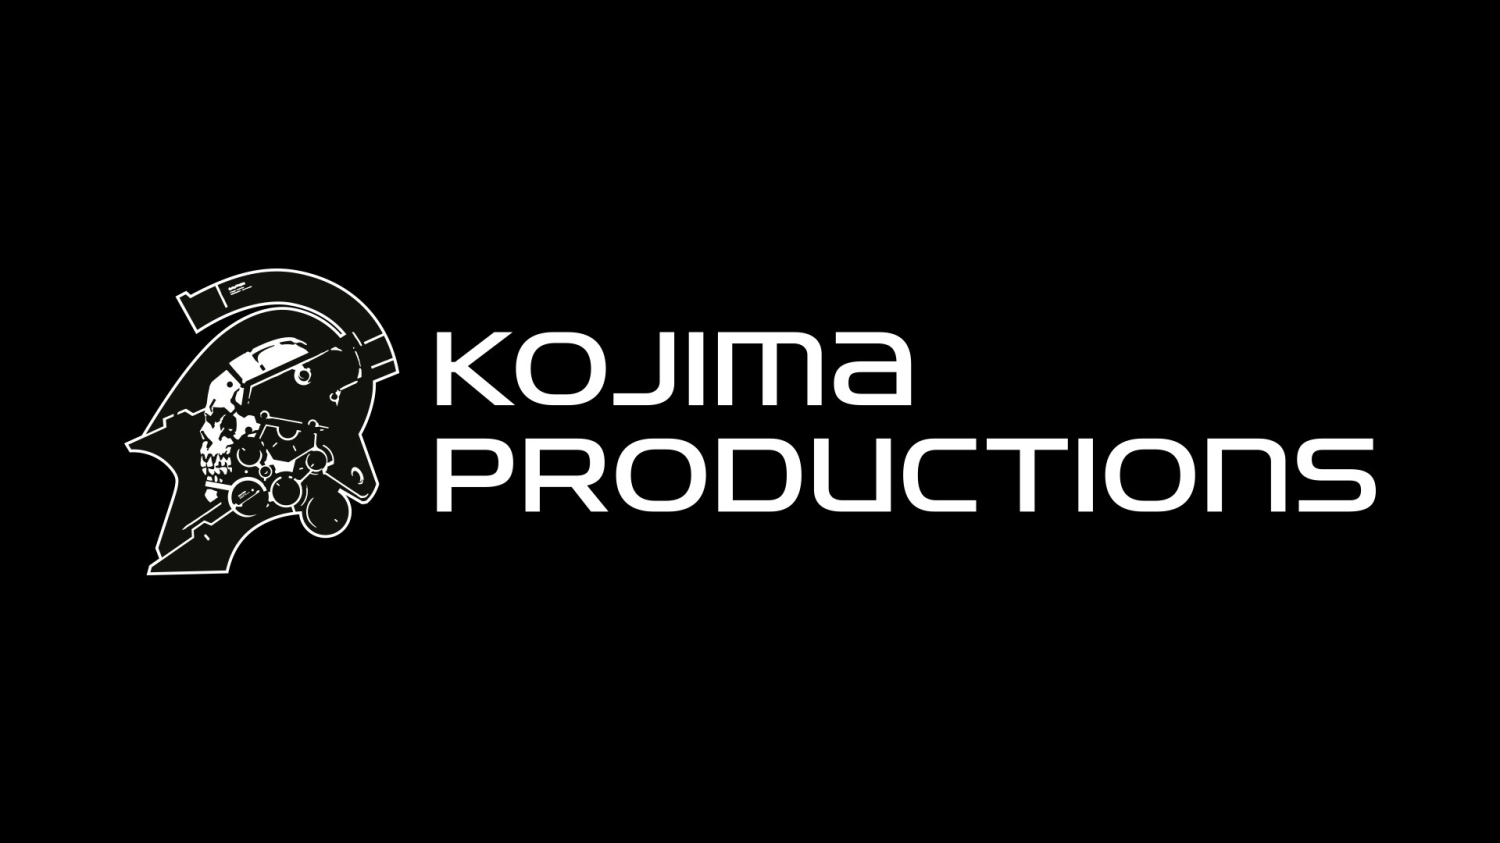 Jordan Peele and Hideo Kojima are collaborating on a horror game - Games